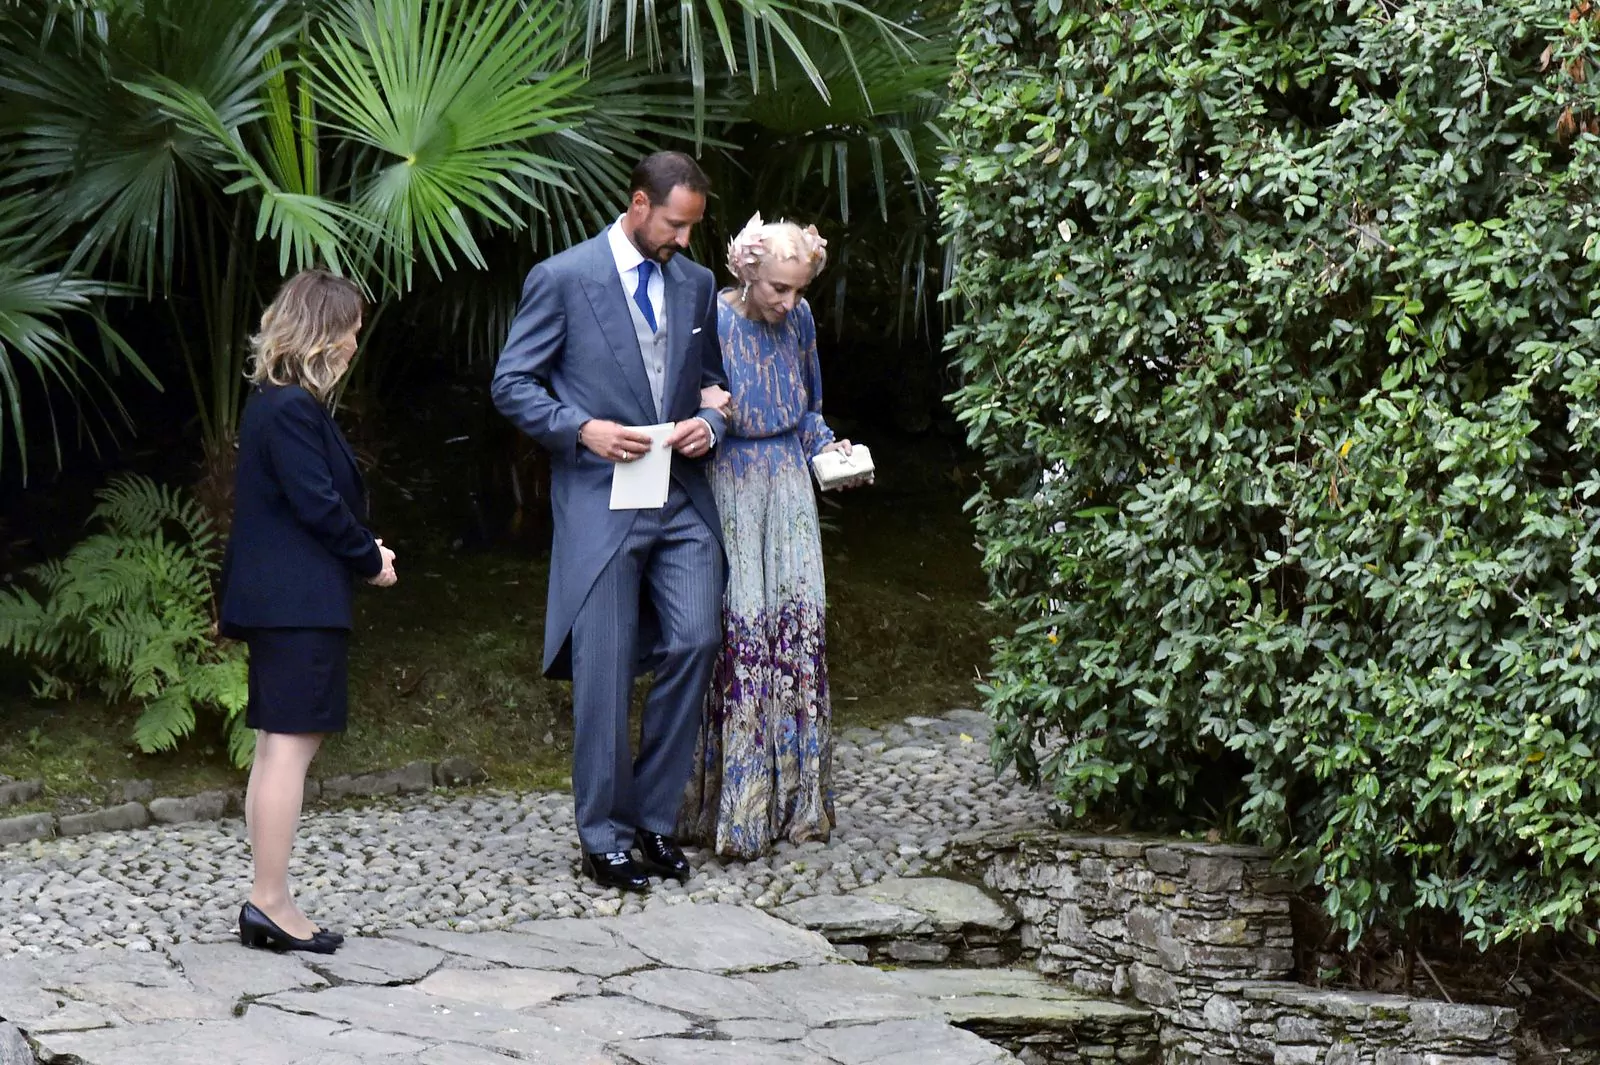 Franca Sozzani and Prince Haakon of Norway arrive for the wedding of Beatrice Borromeo and Pierre Casiraghi on Lake Maggiore, Italy, August 1, 2015.